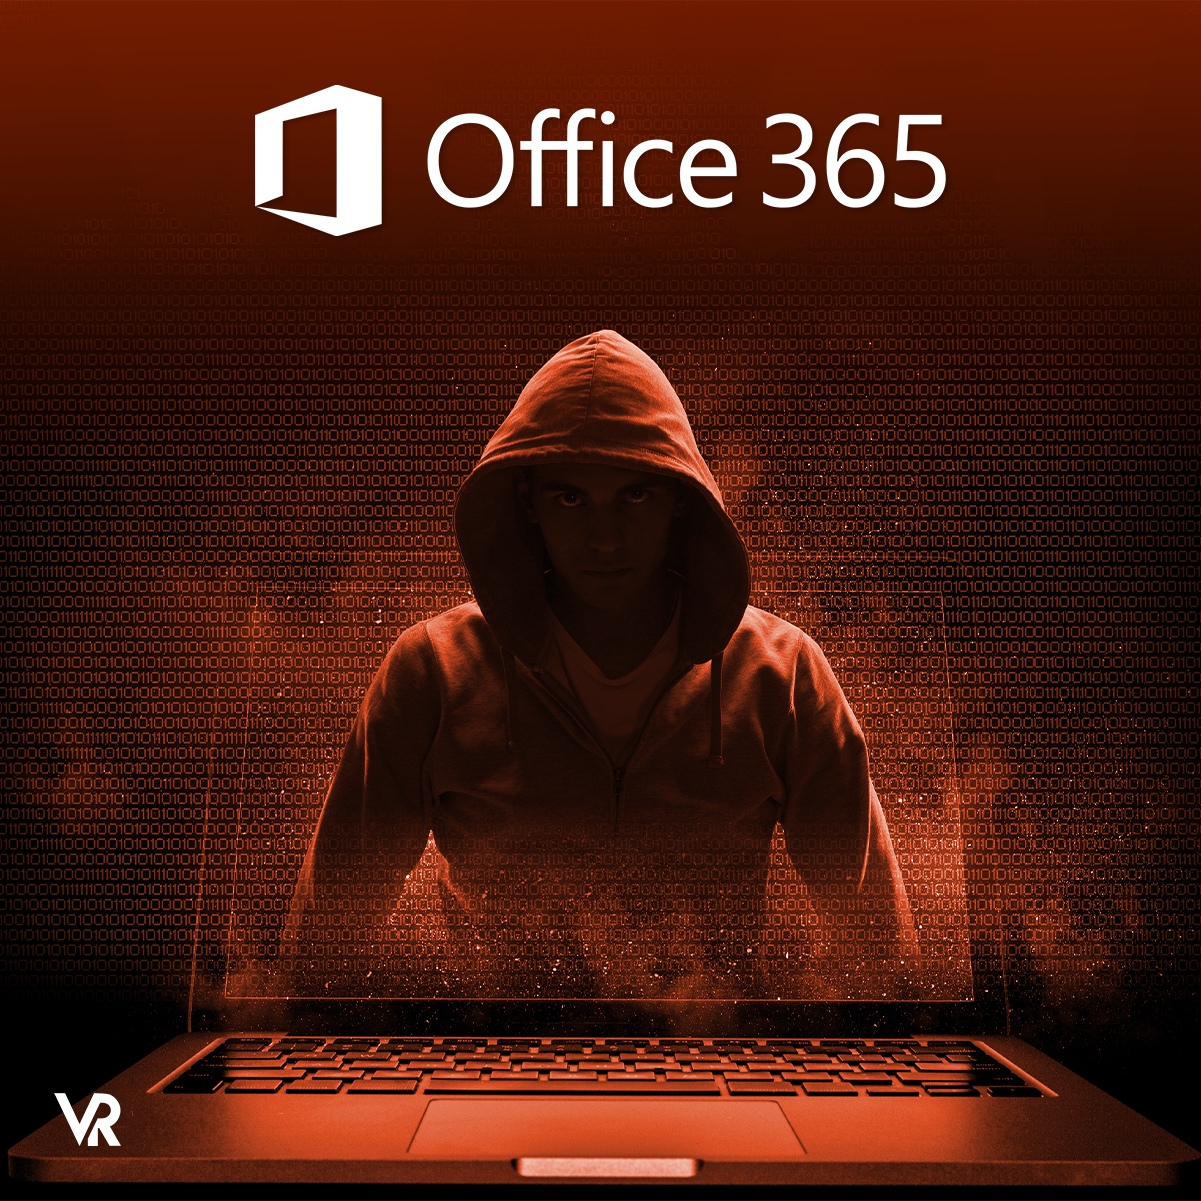 Microsoft warns over password attacks against these Office 365 customers